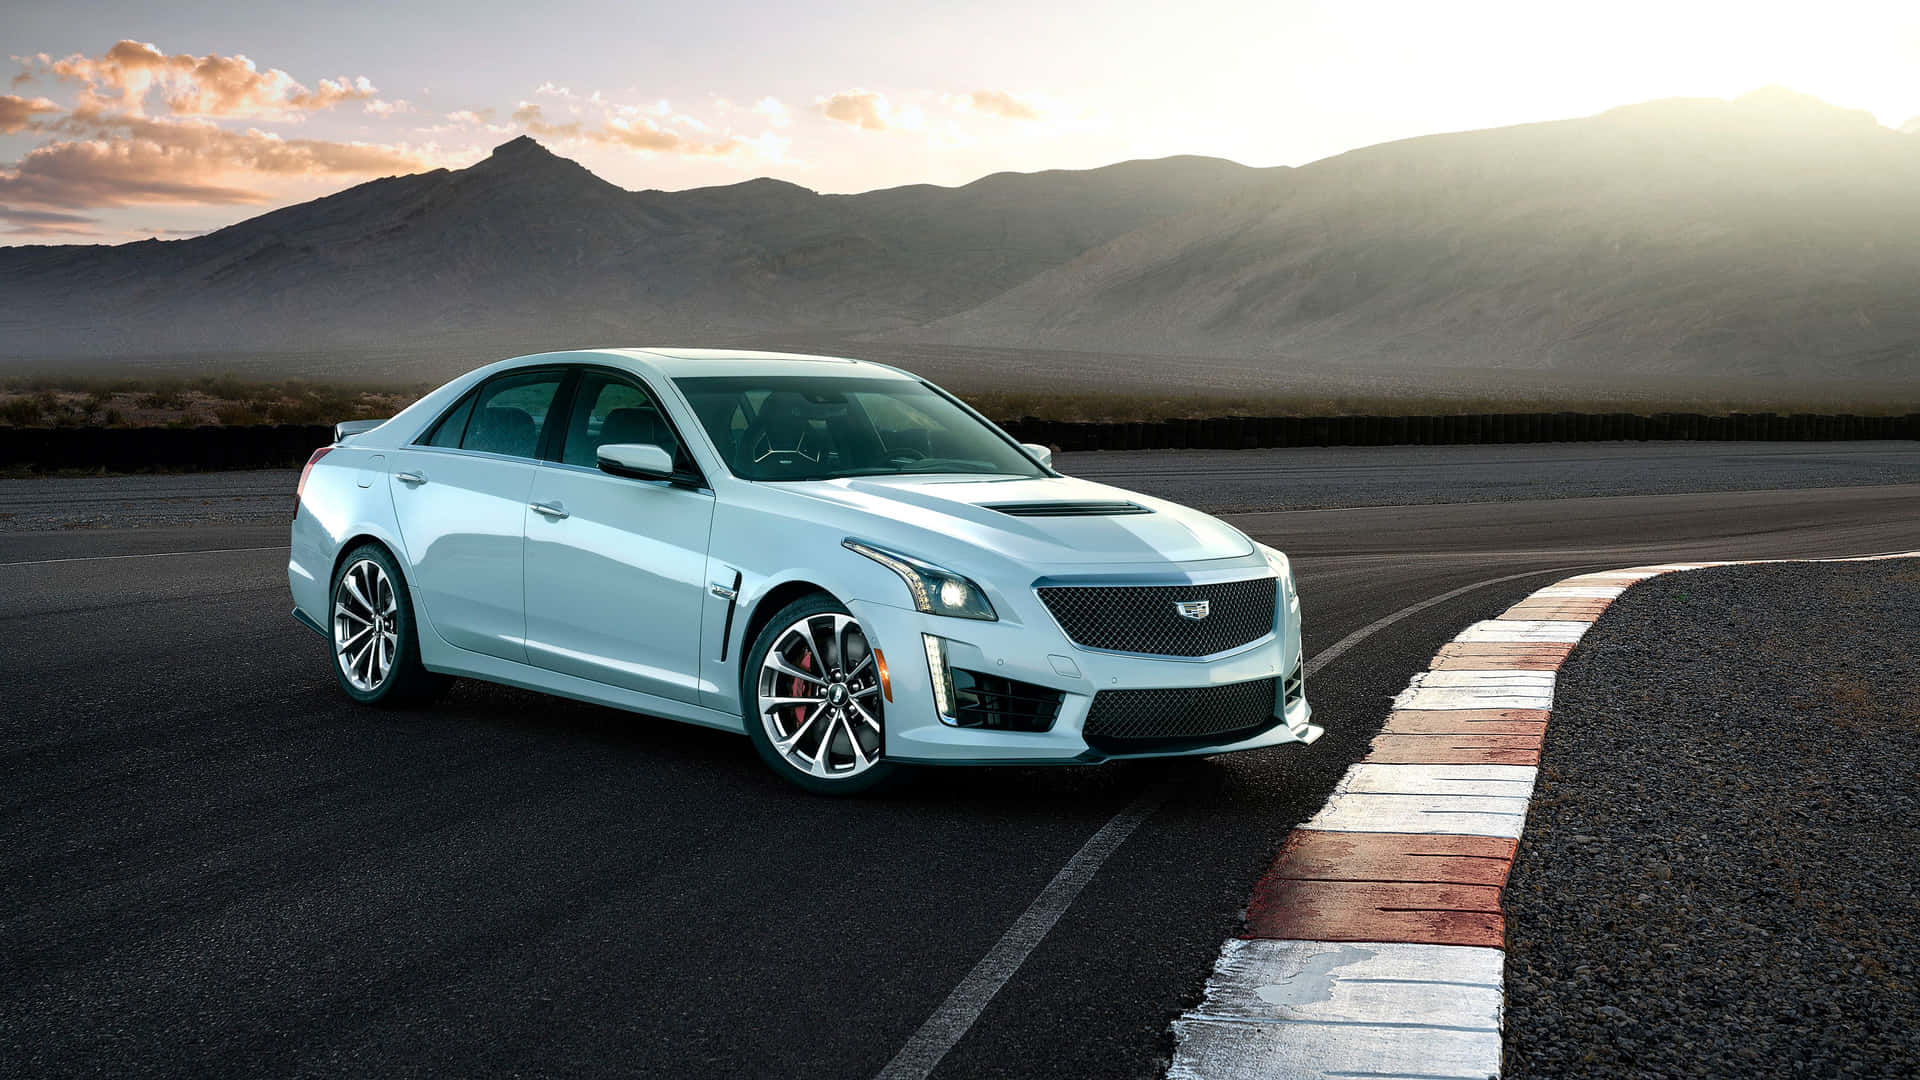 Sleek and Elegant Cadillac CTS on Open Road Wallpaper